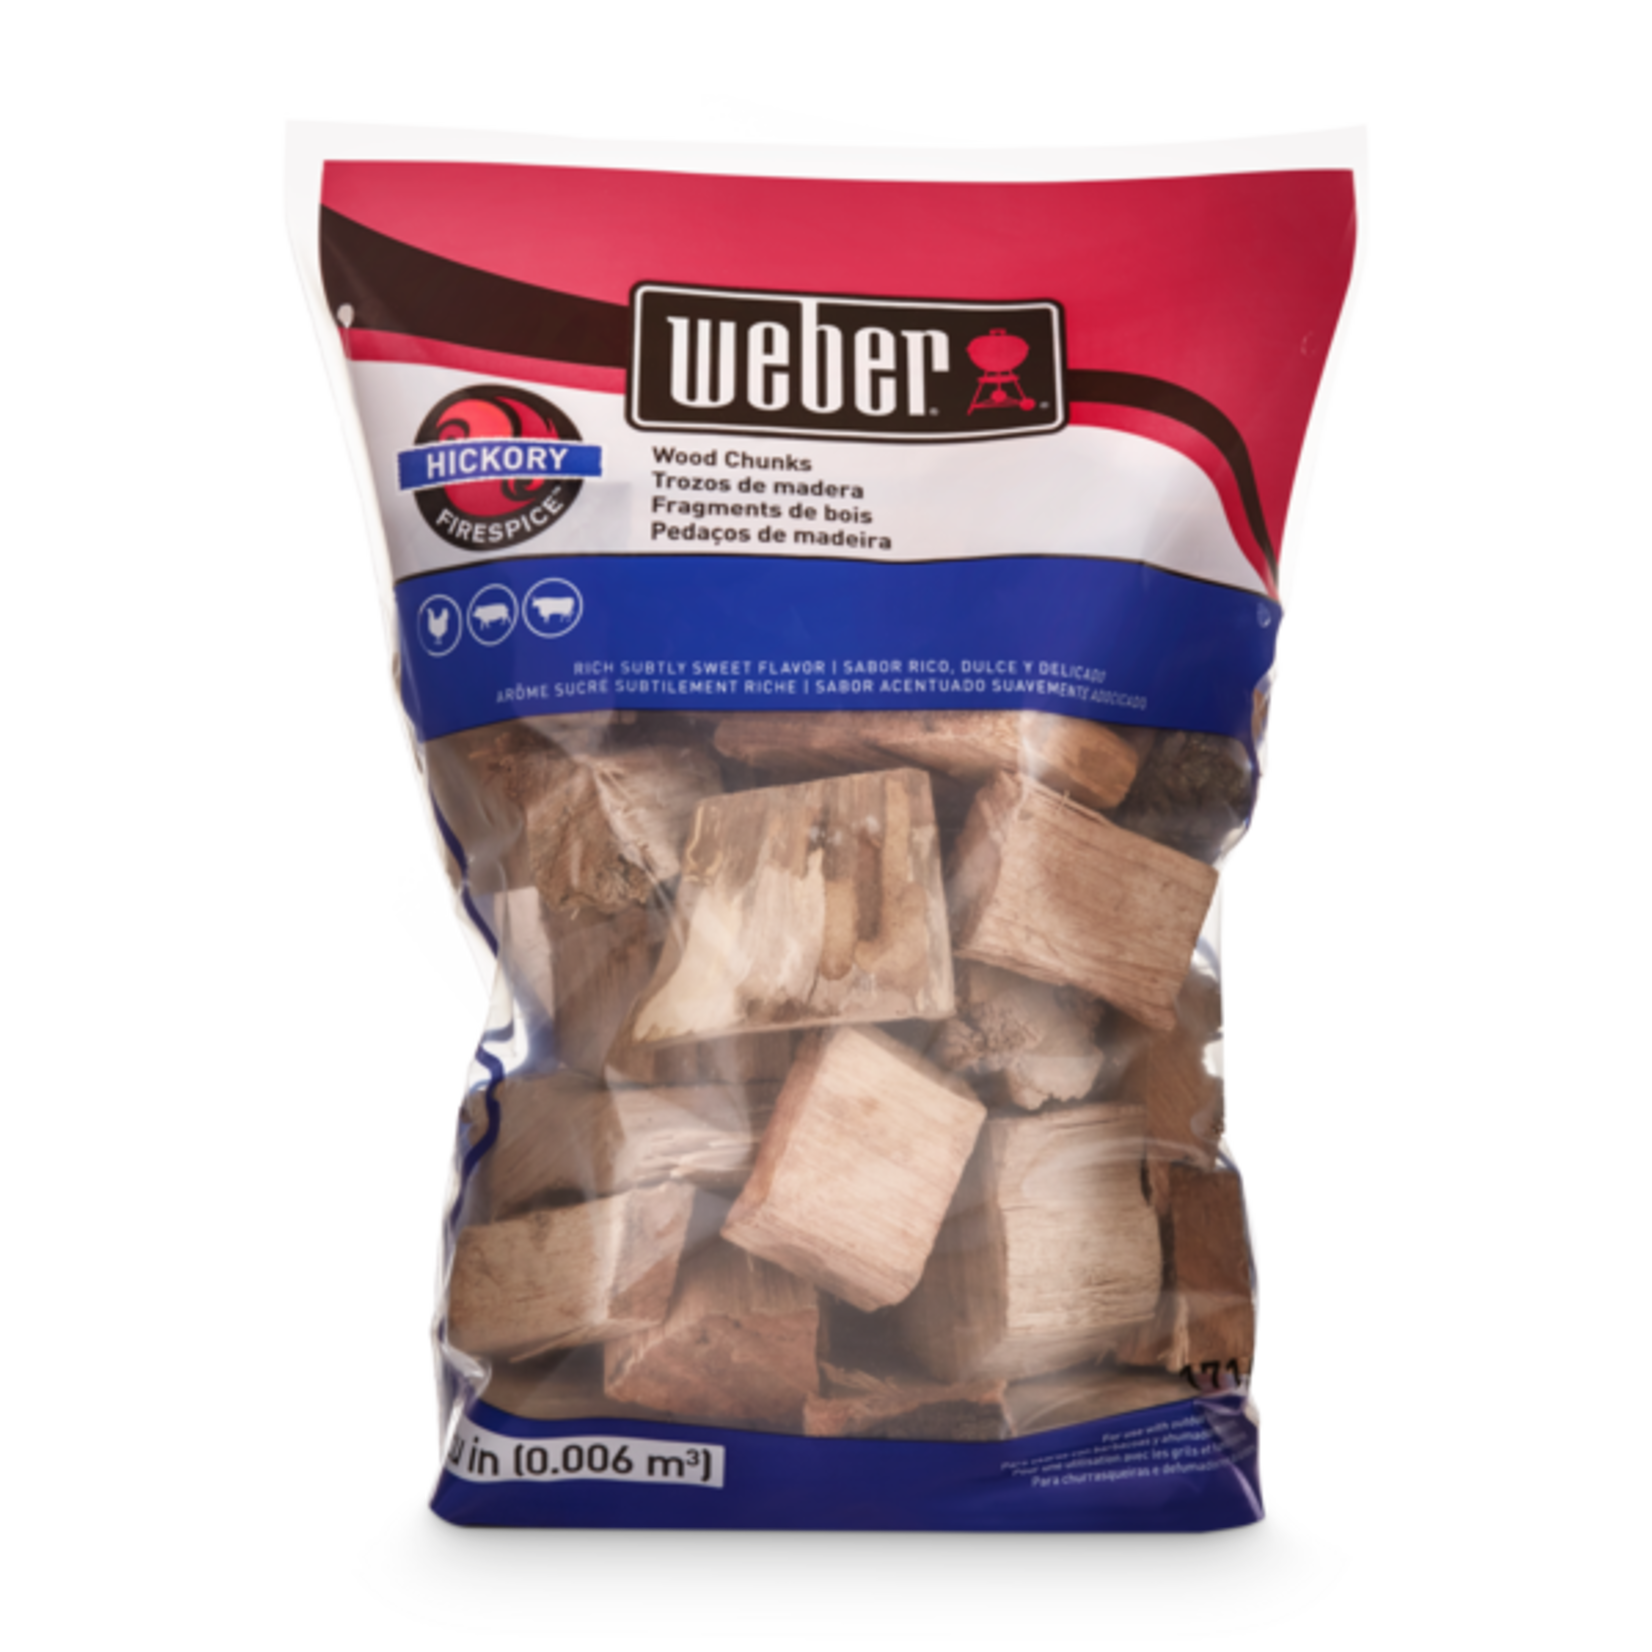 Weber Hickory Wood Chunks 6L / 350 in³